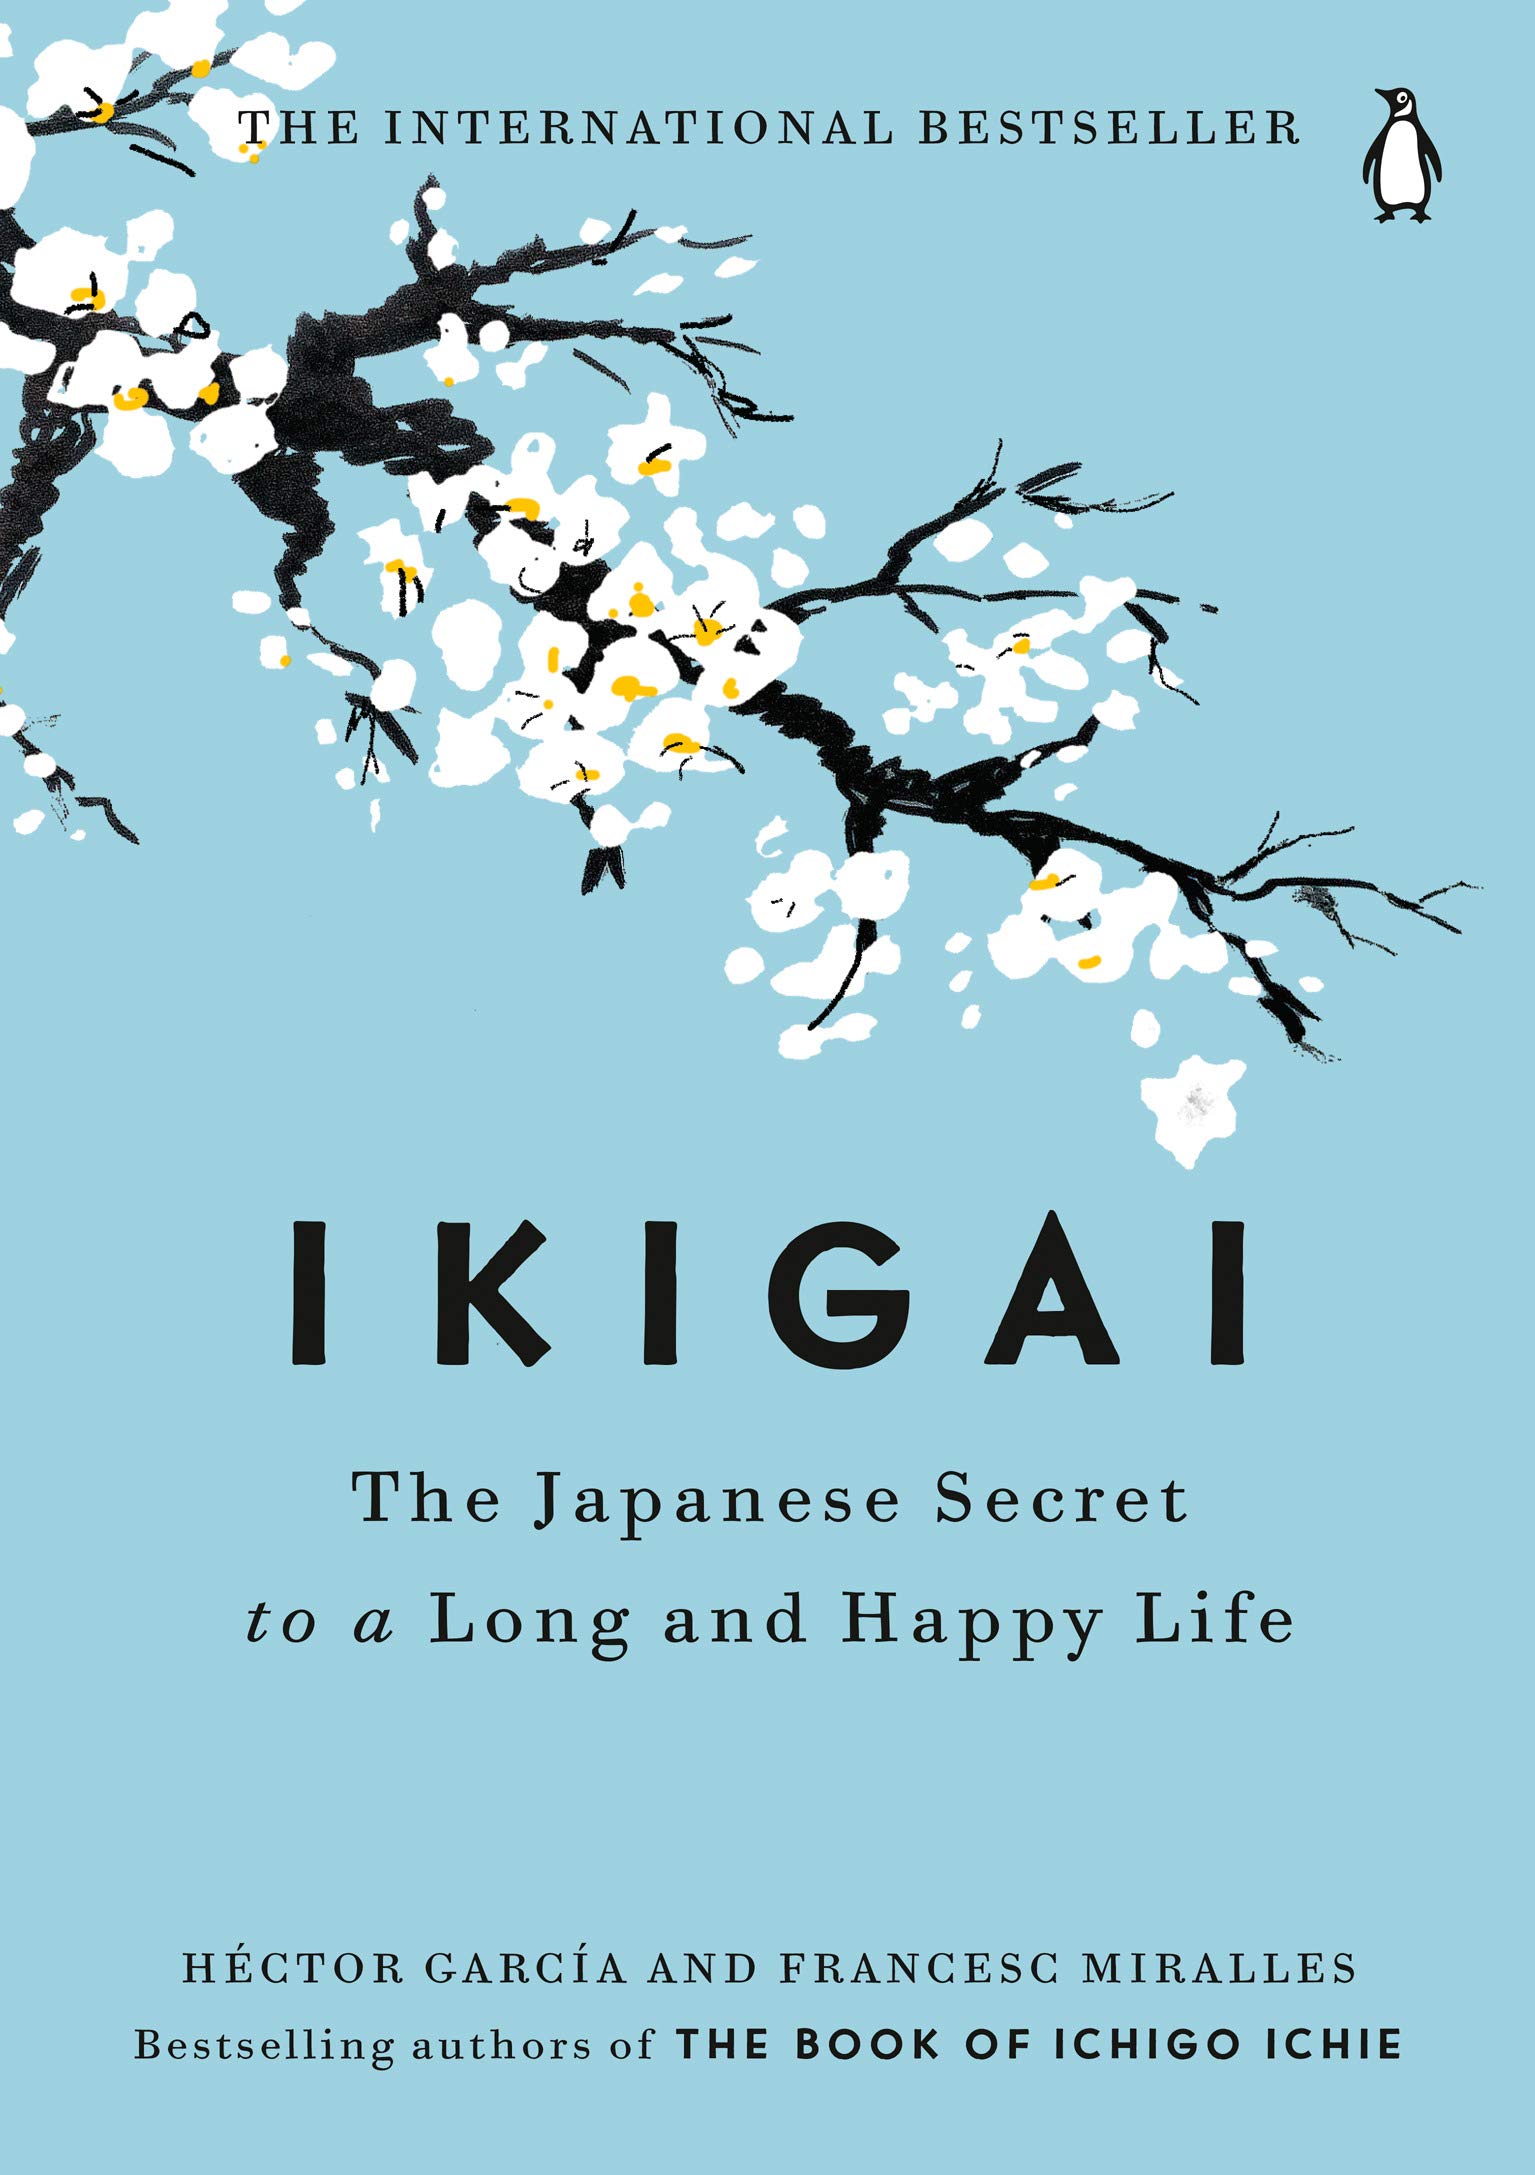 Ikigai: The Japanese secret to a long and happy life by Hector Garcia and Francesc Miralles